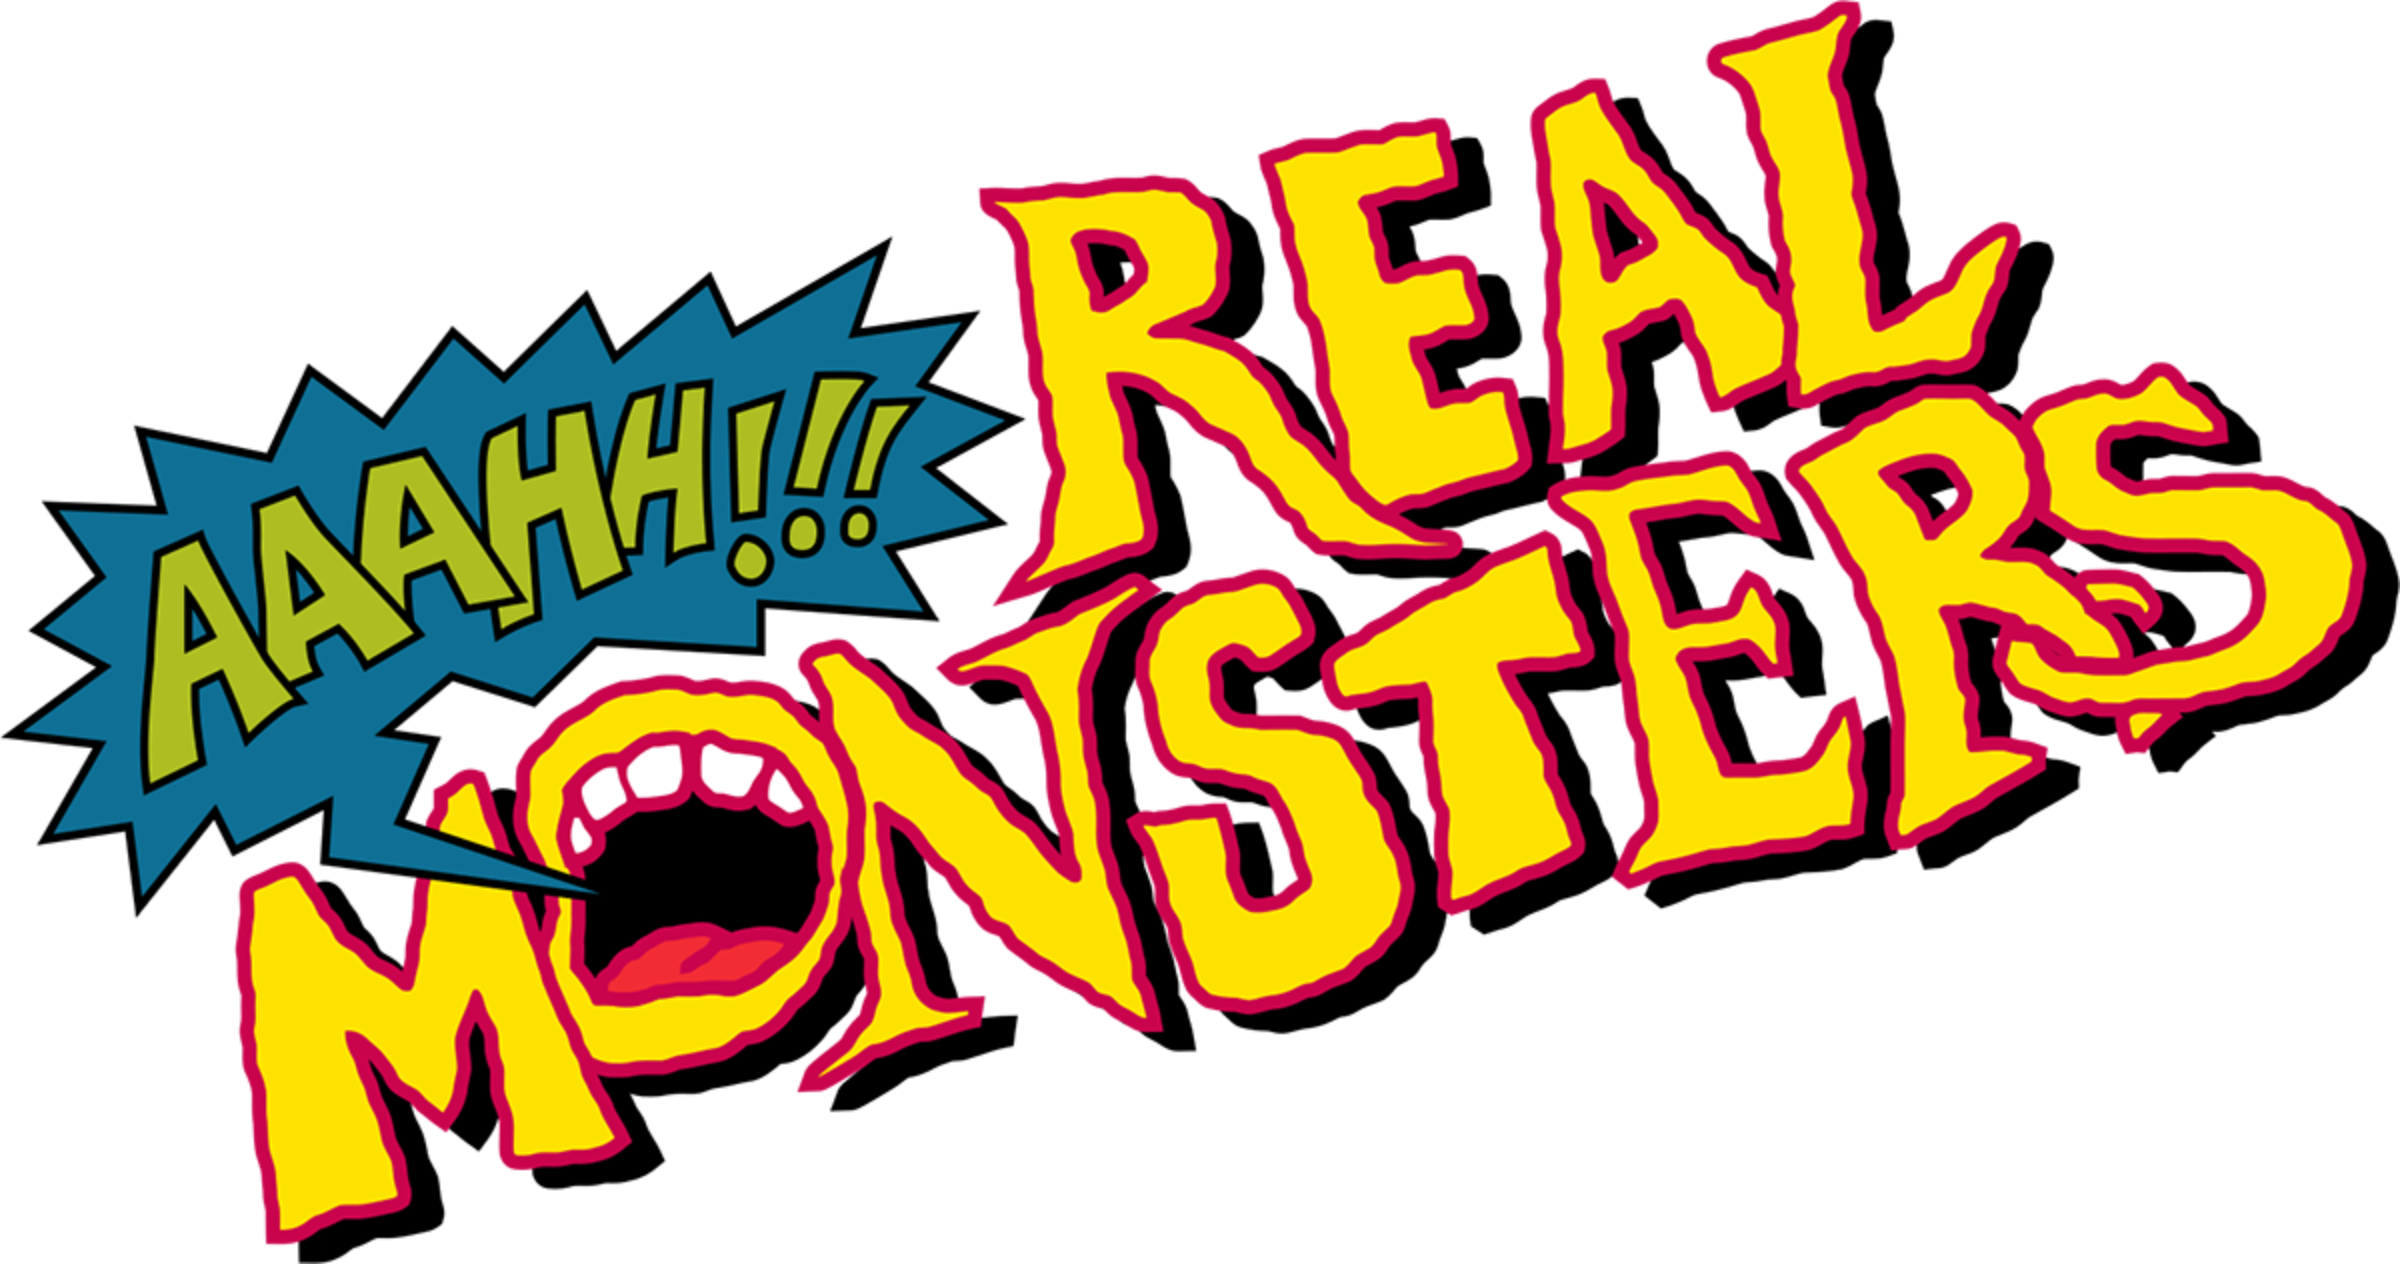 Aaahh!!! Real Monsters (6 DVDs Box Set)